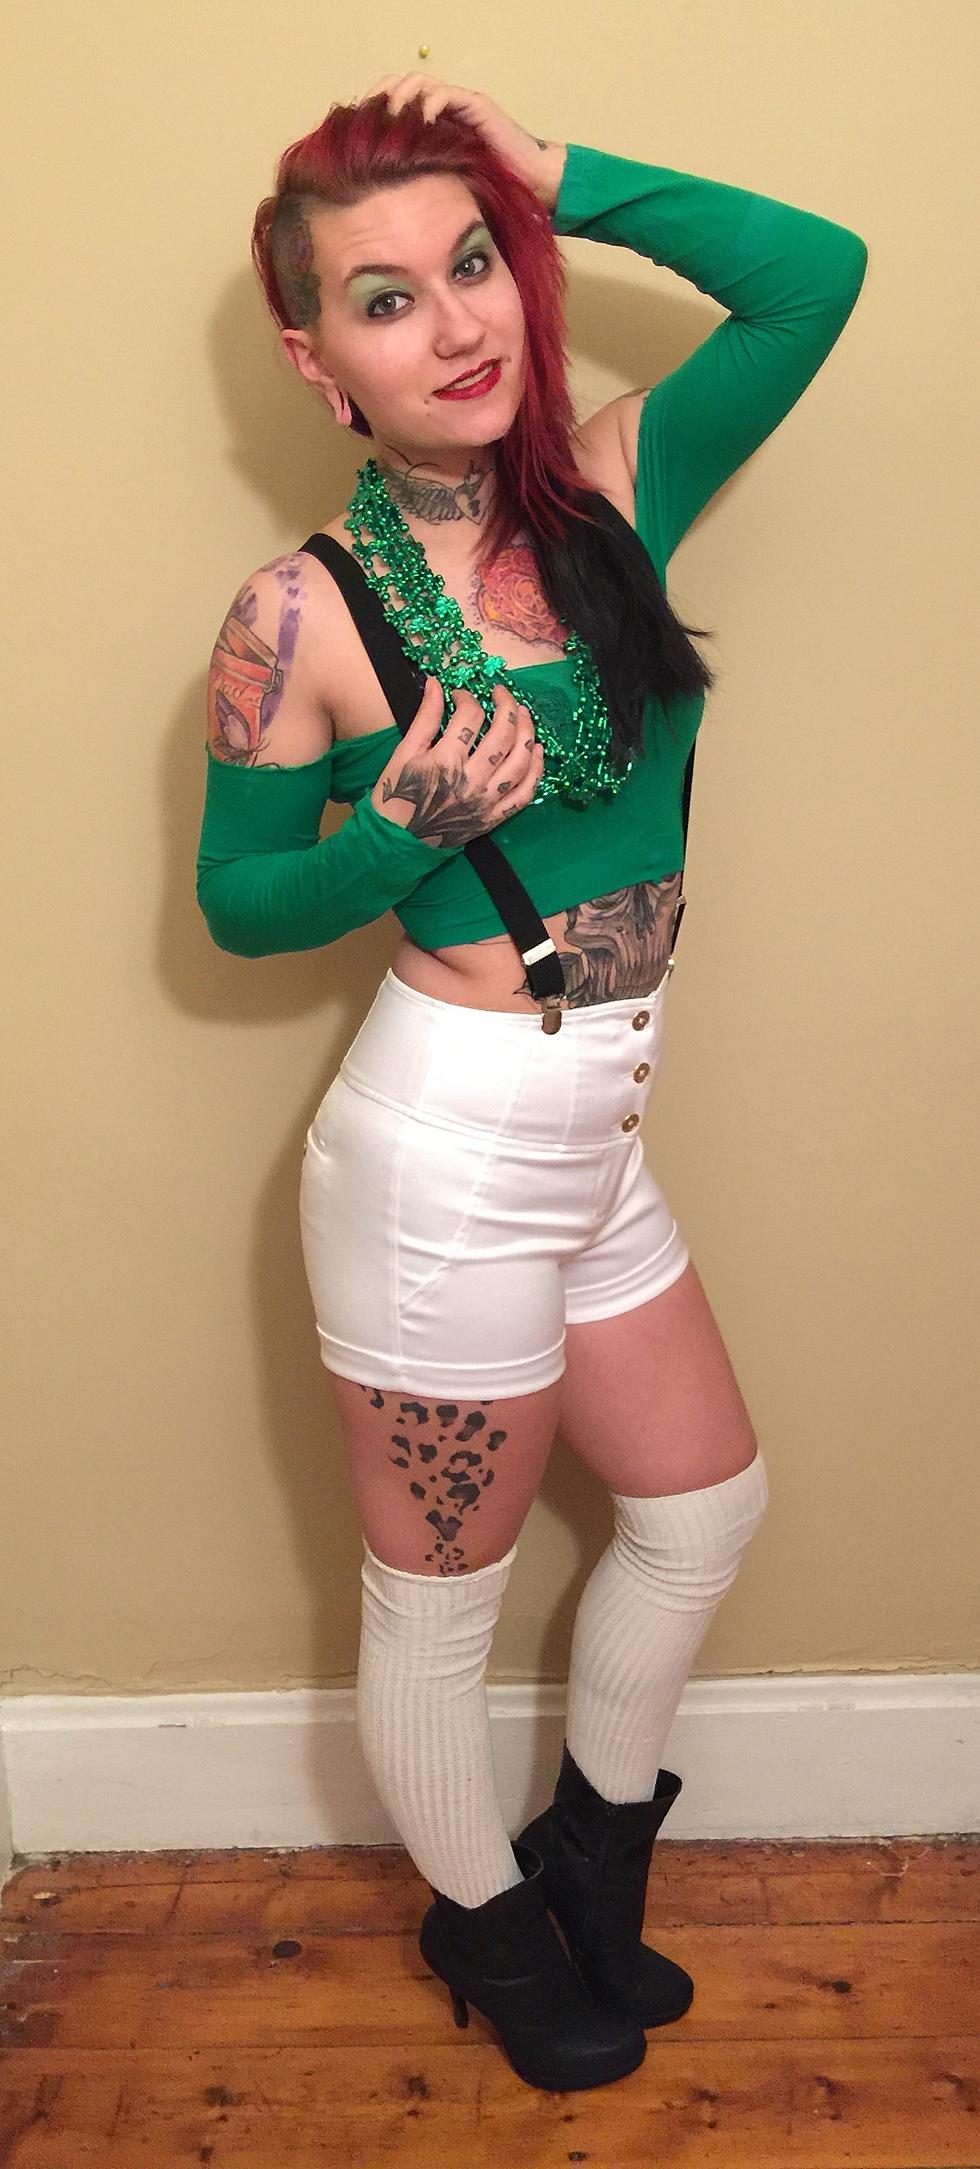 Party With Q103’s Rock Girl Krystal on St. Paddy’s